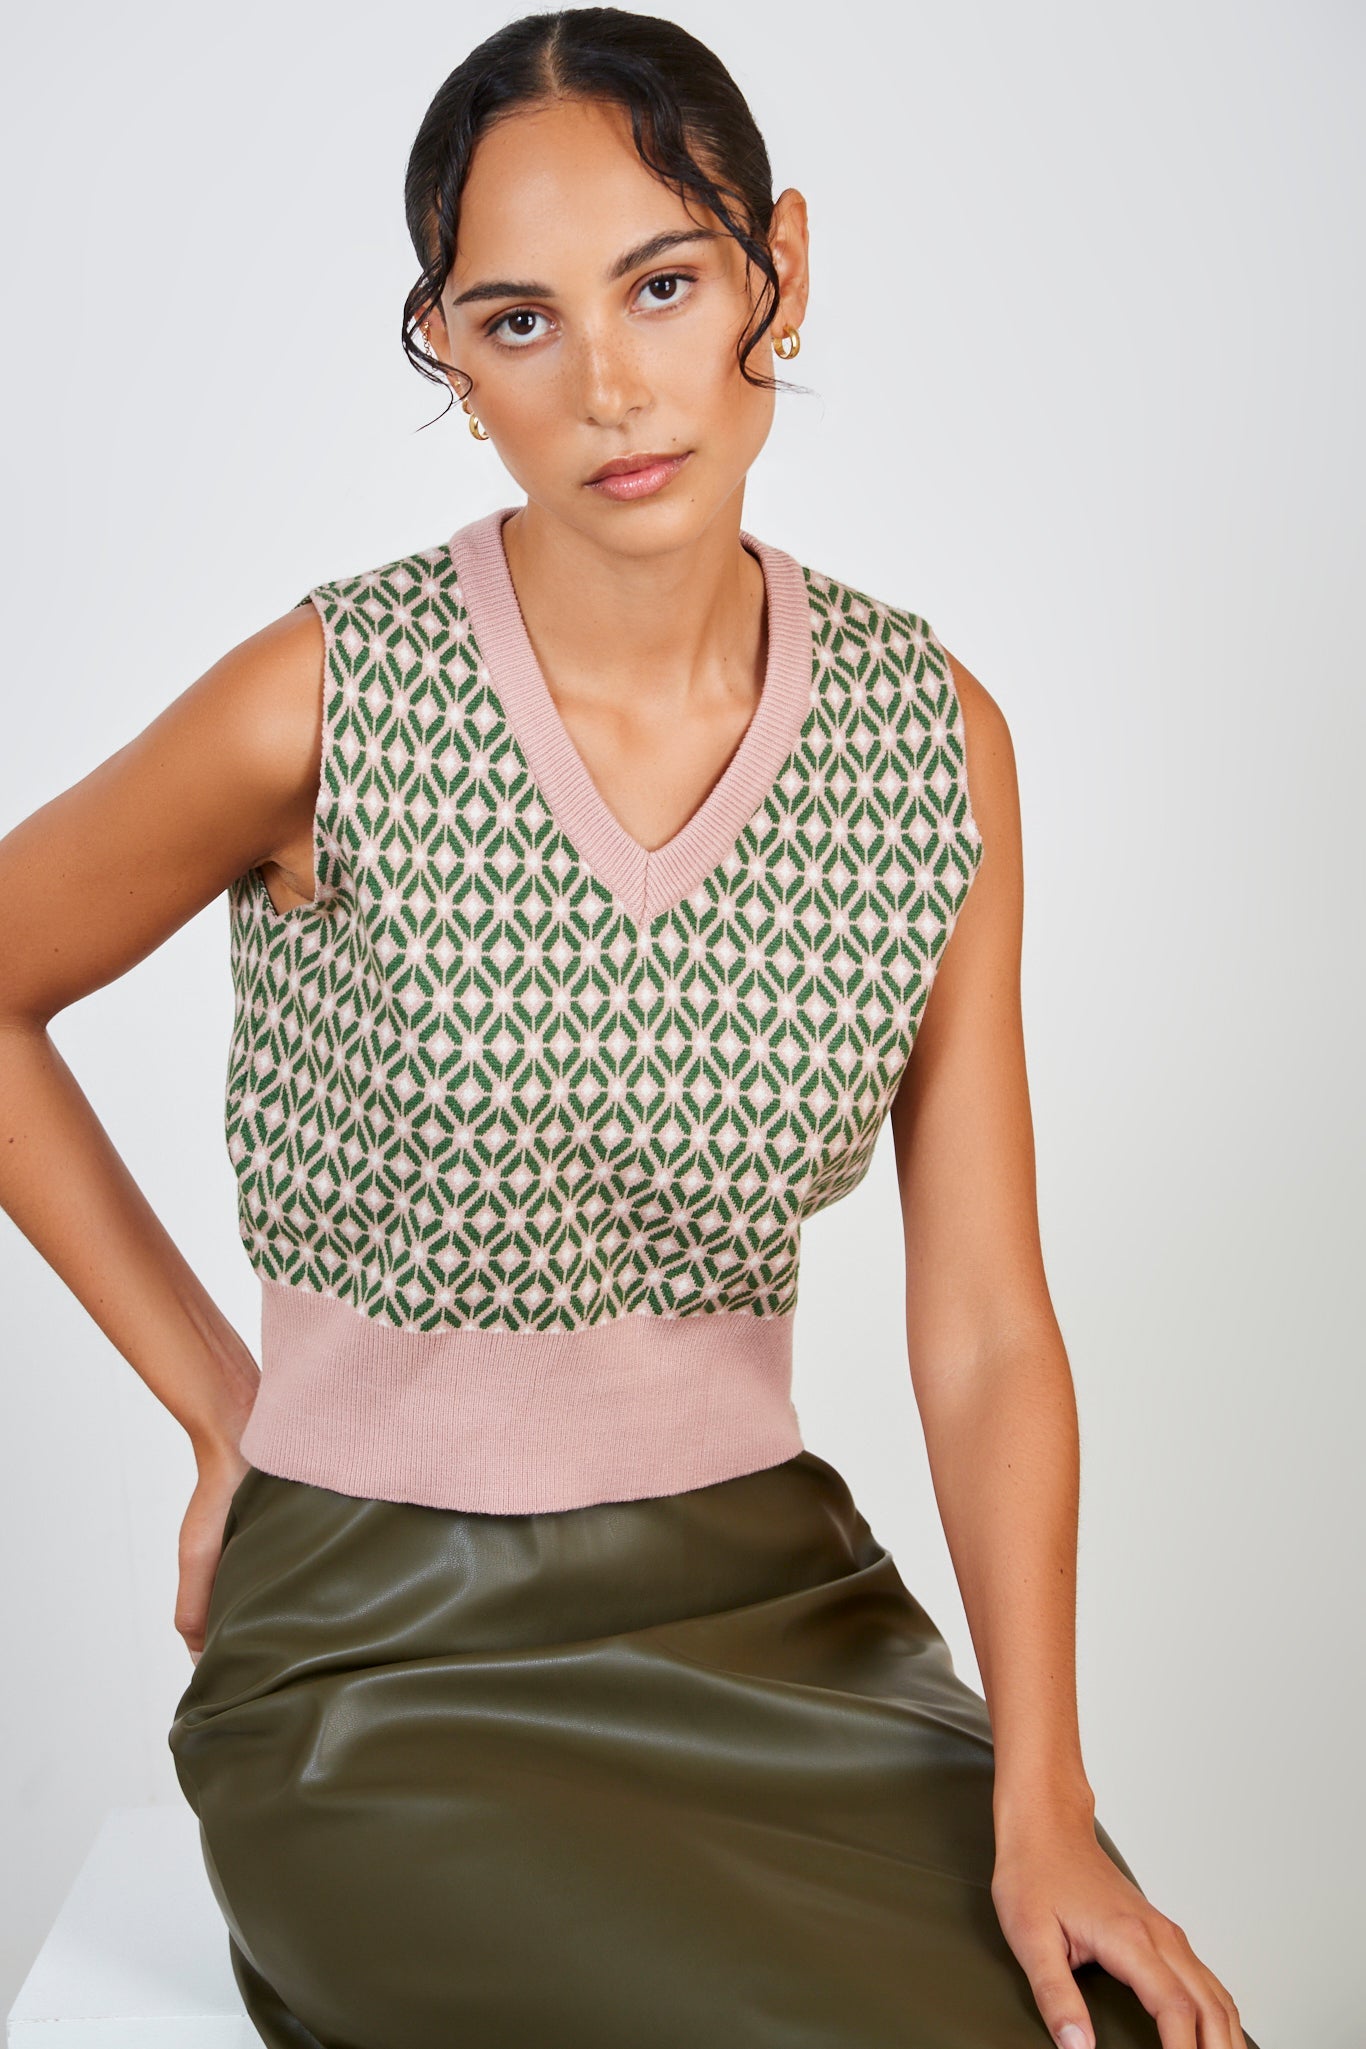 Pink and green geometric sweater vest